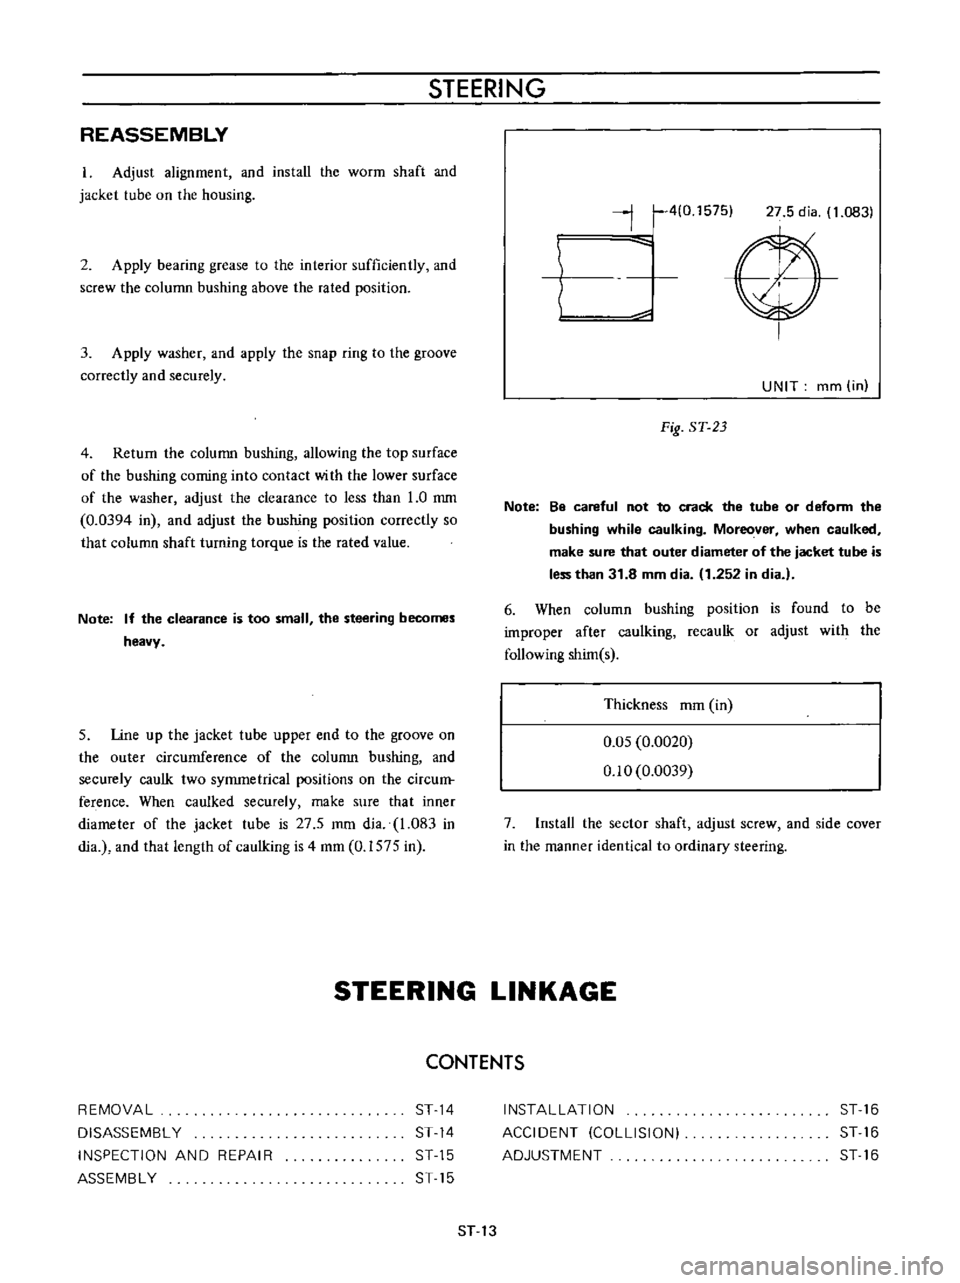 DATSUN B110 1973  Service User Guide 
STEERING

REASSEMBLY

Adjust 
alignment 
and 
install 
the

worm 
shaft 
and

jacket 
tube 
on 
the

housing

2

Apply 
bearing 
grease 
to 
the 
interior

sufficiently 
and

screw 
the

column

bush